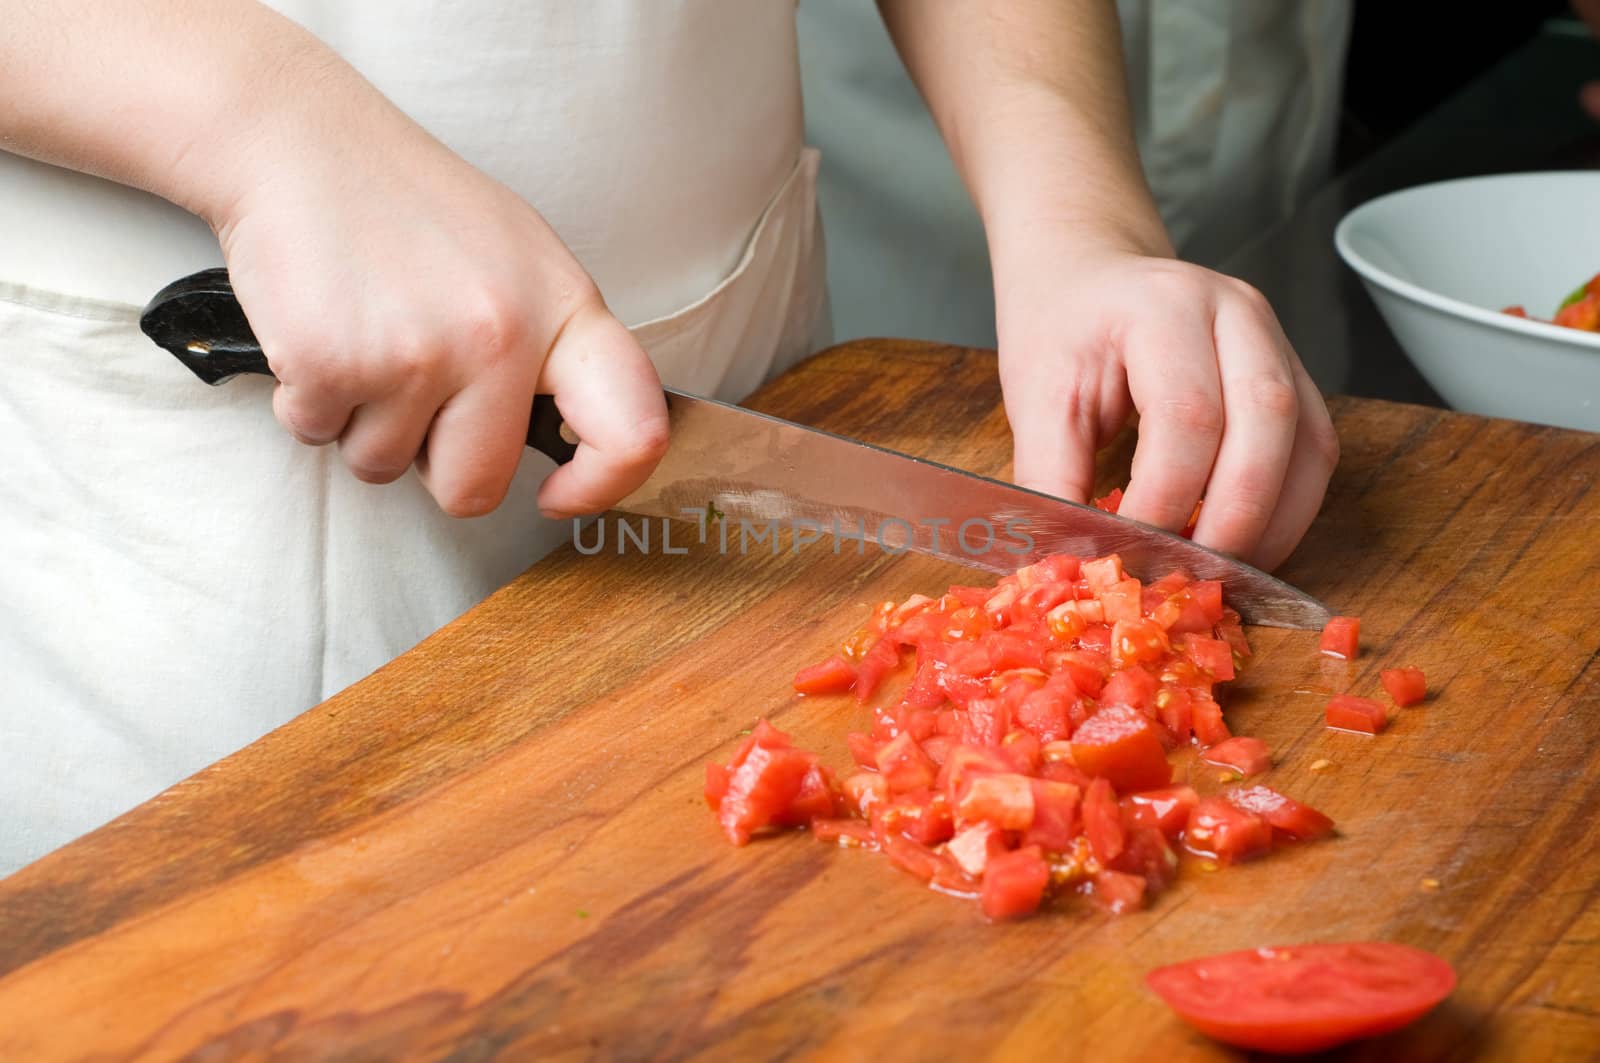 chopping the tomato by starush